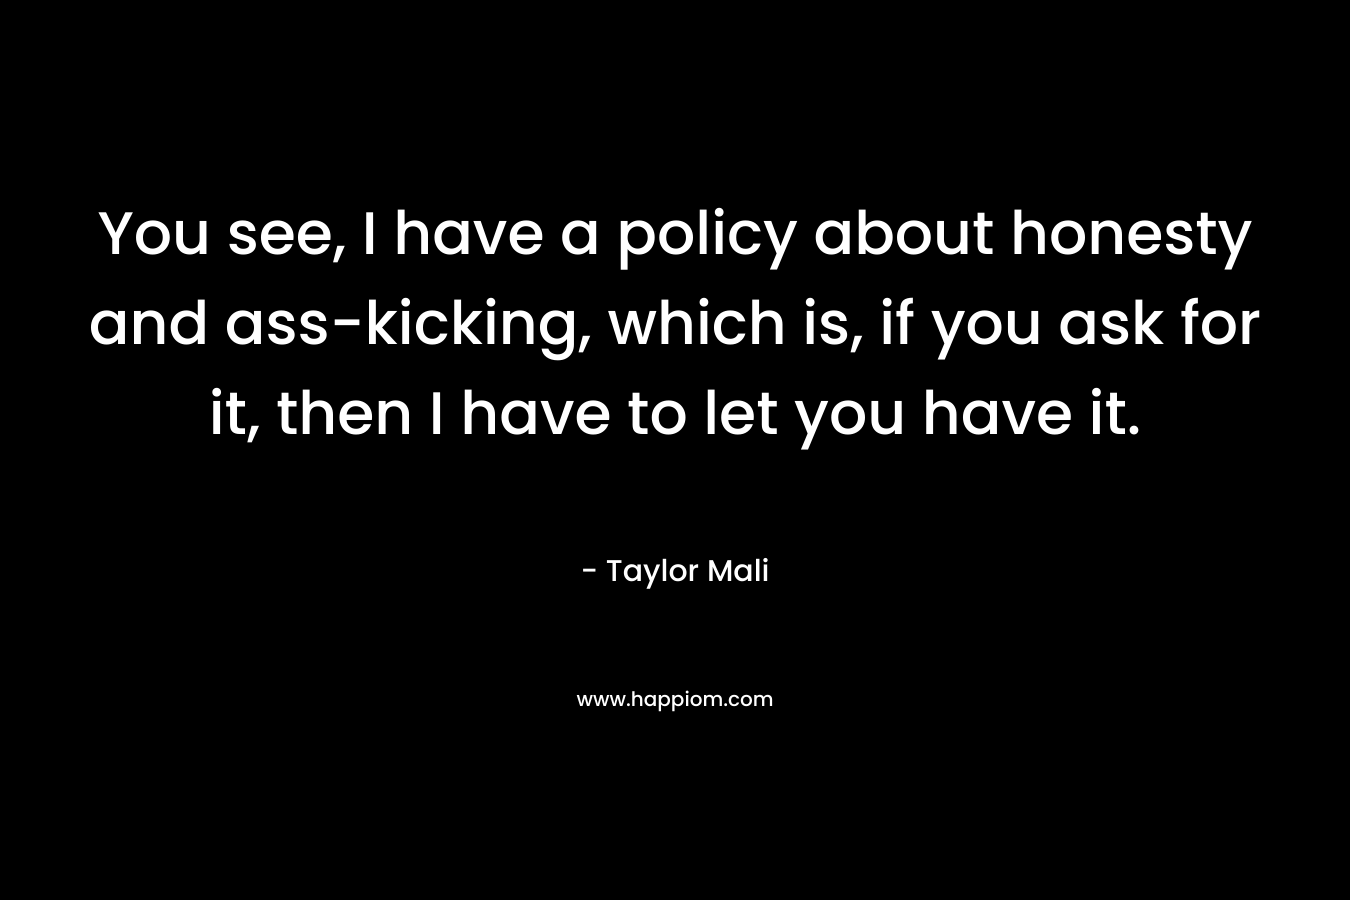 You see, I have a policy about honesty and ass-kicking, which is, if you ask for it, then I have to let you have it. – Taylor Mali